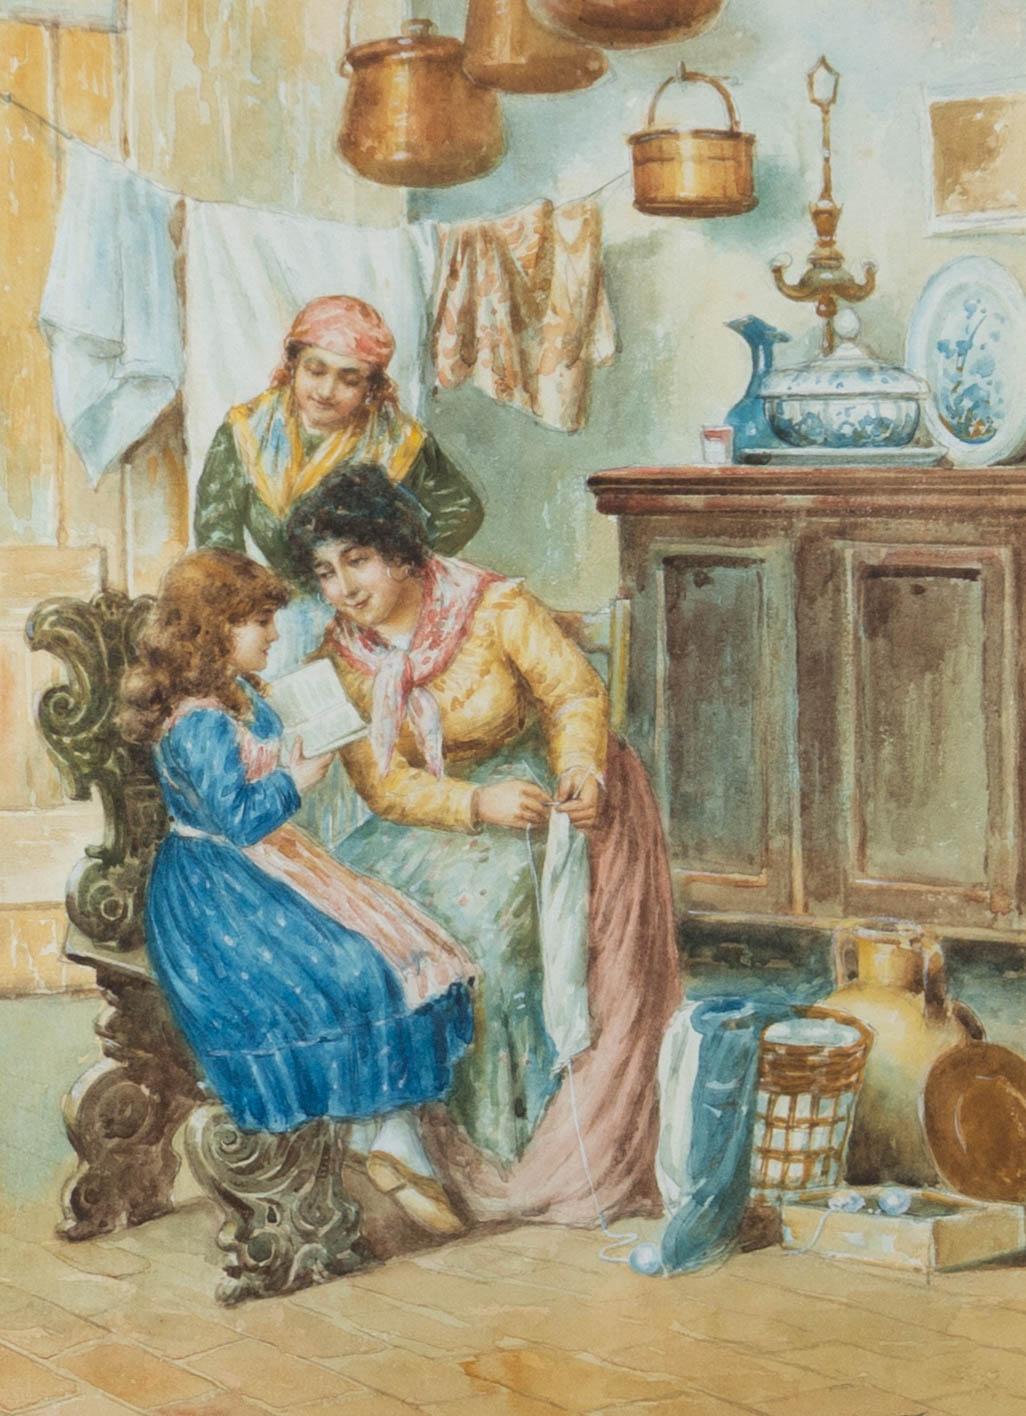 An Italian painting depicting two women supervising a young girl practising her reading. Presented glazed in an ornate gilt frame with a gold slip. Signed to the lower-right edge. Inscribed with the title and name of the artist to the lower edge of